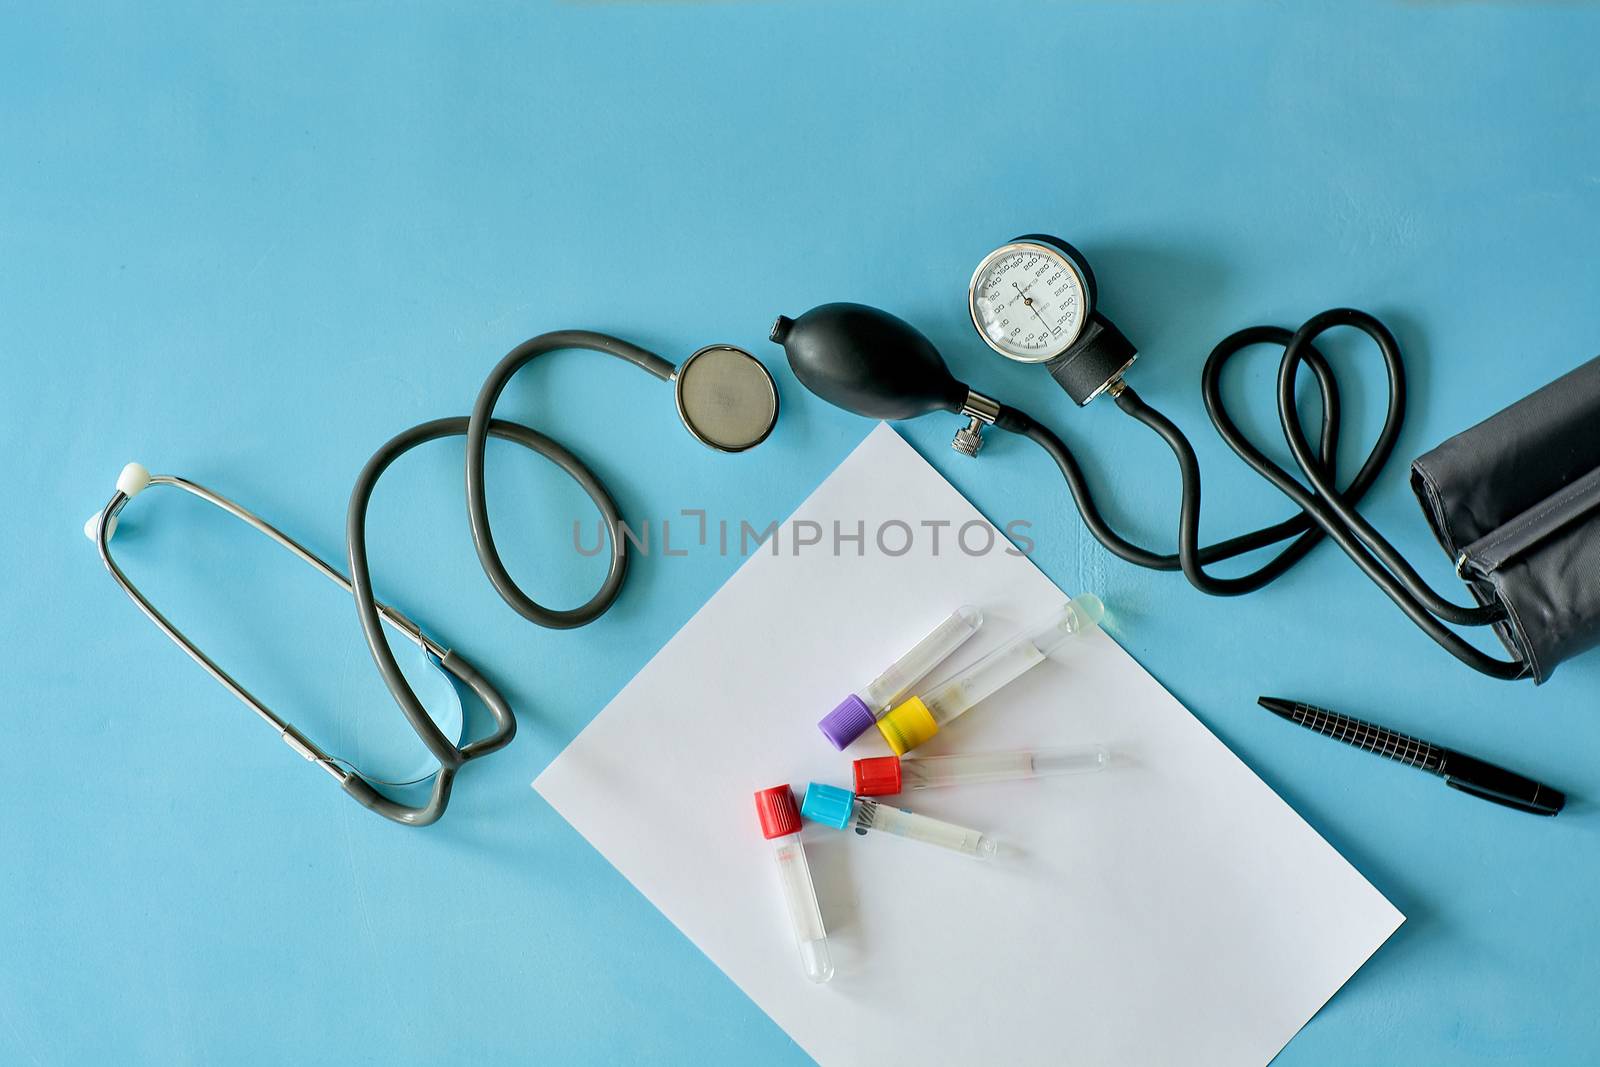 White sheet paper with black pen and phonendoscope stethoscope, sphygmomanometer, vacuum venipuncture test tubes on blue background with copy space for text. Medicine consept.